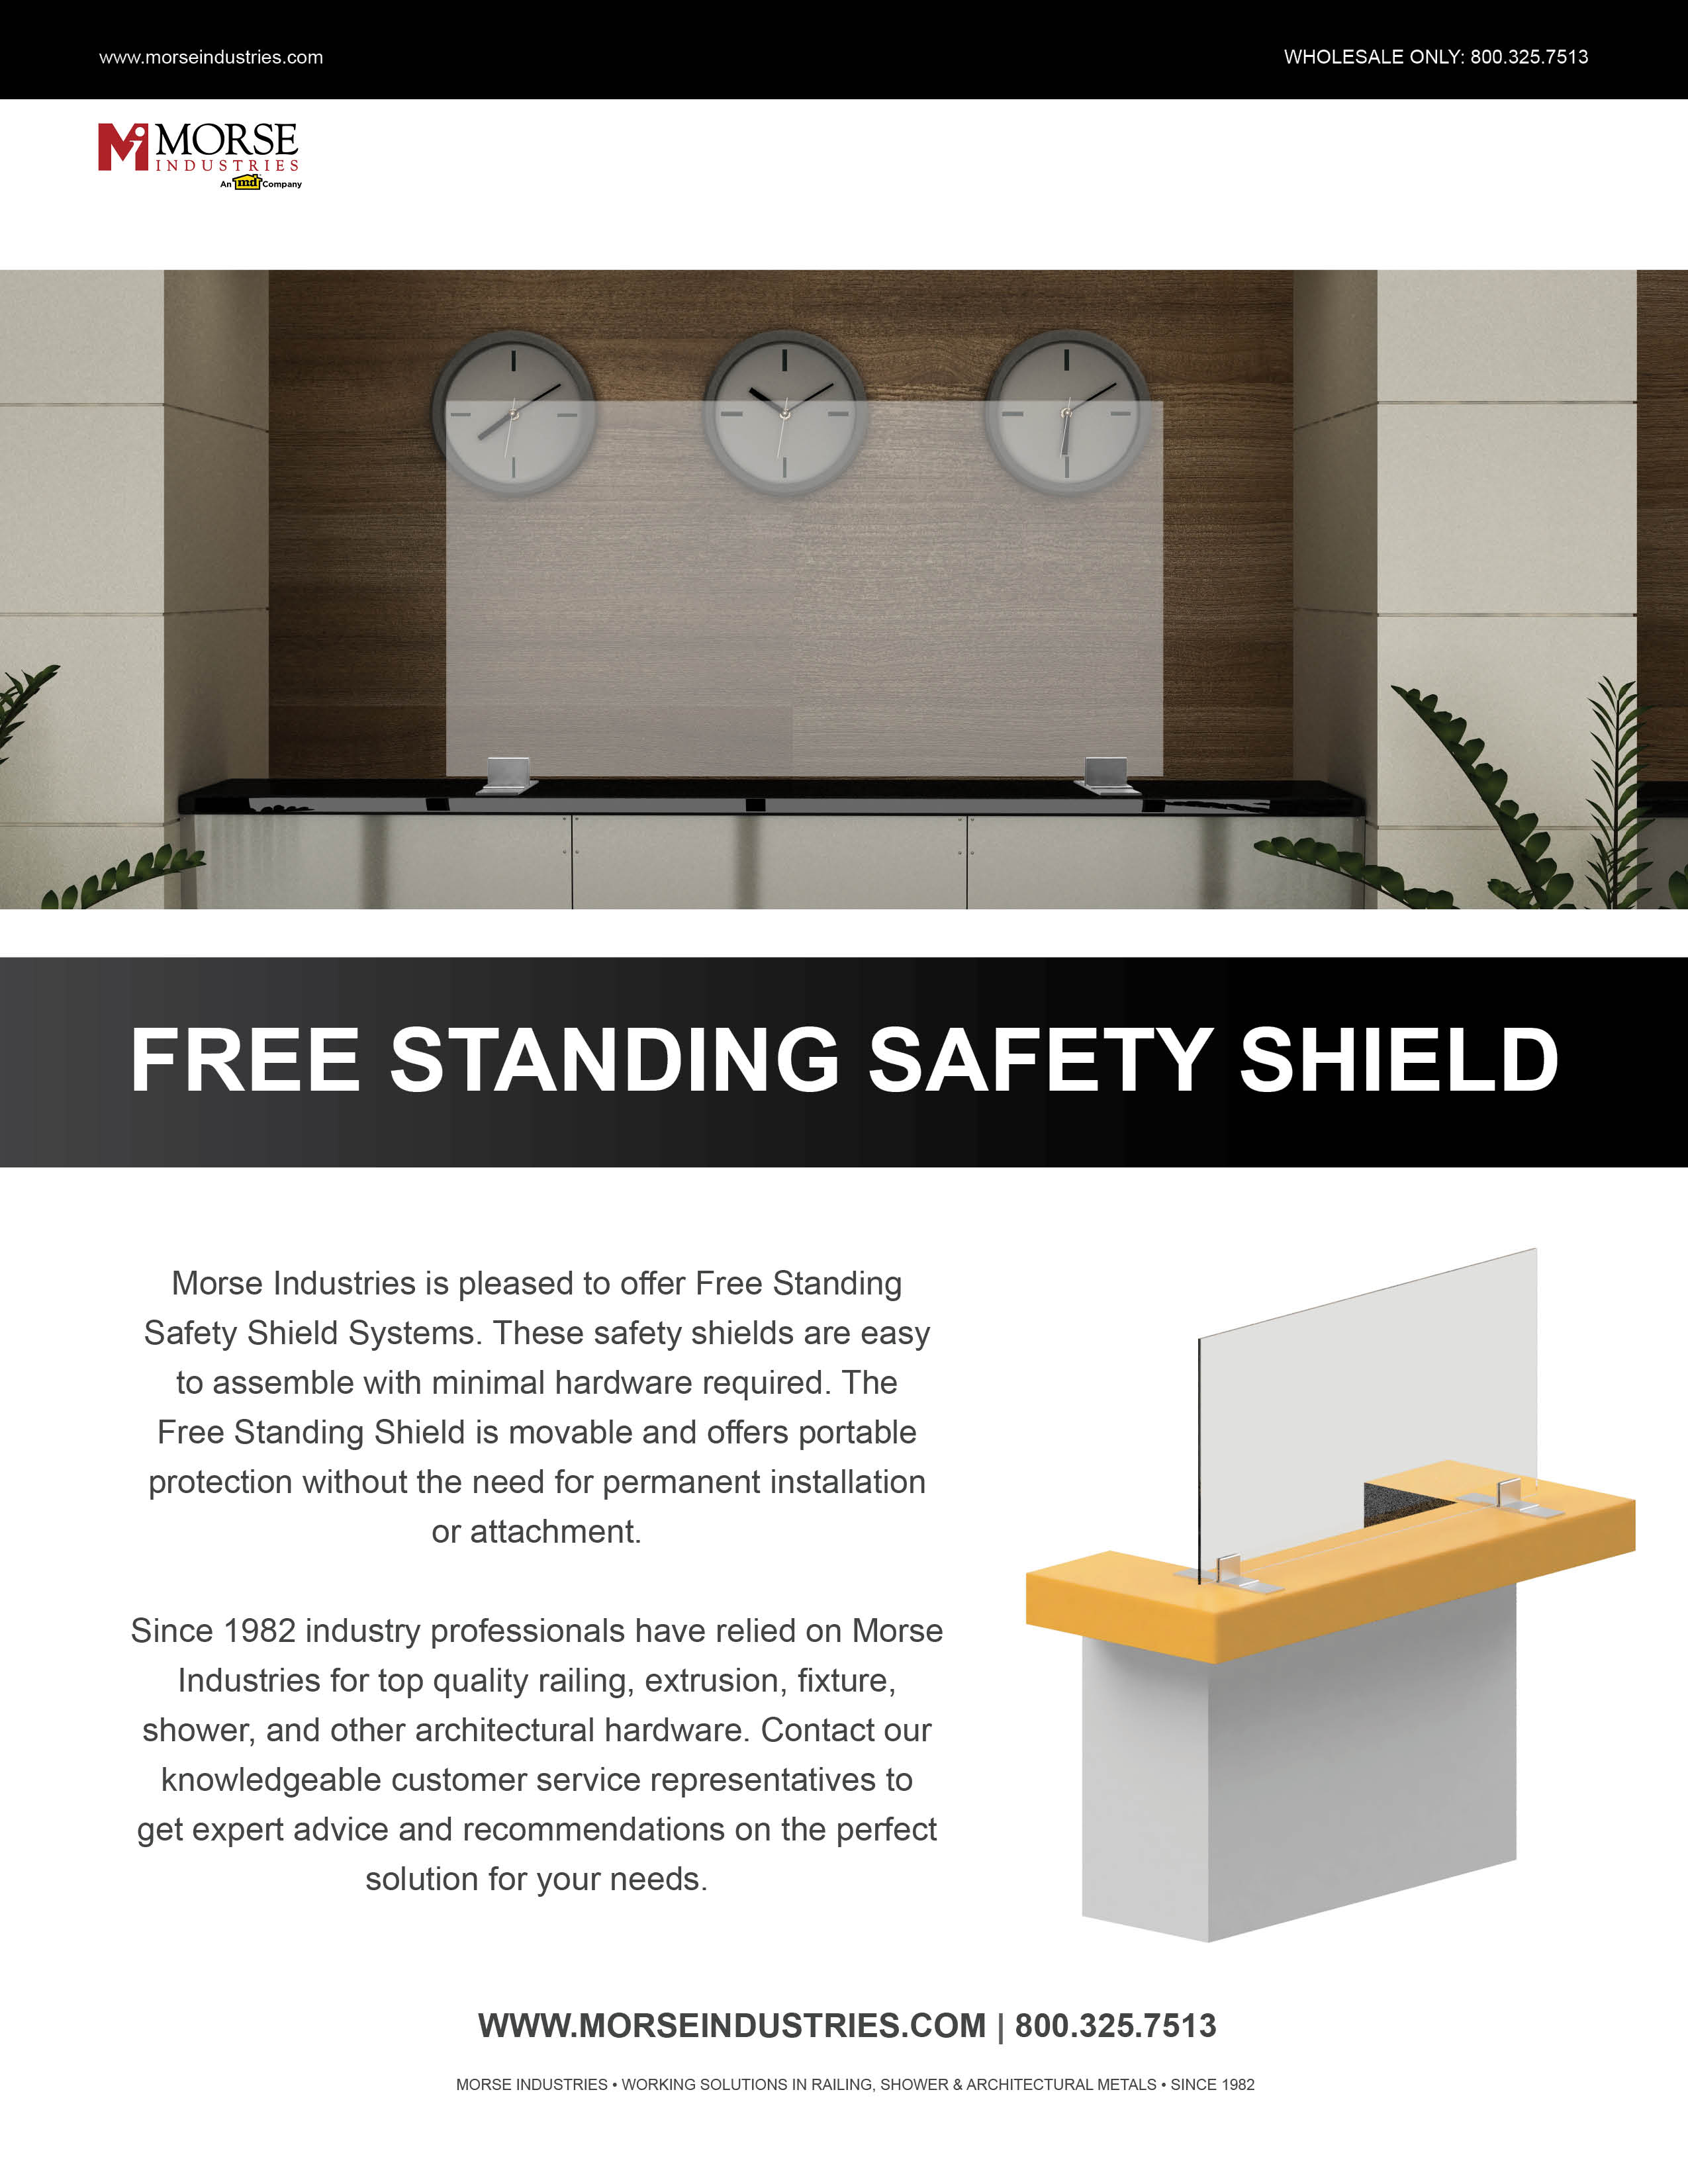 Free Standing Safety Shield